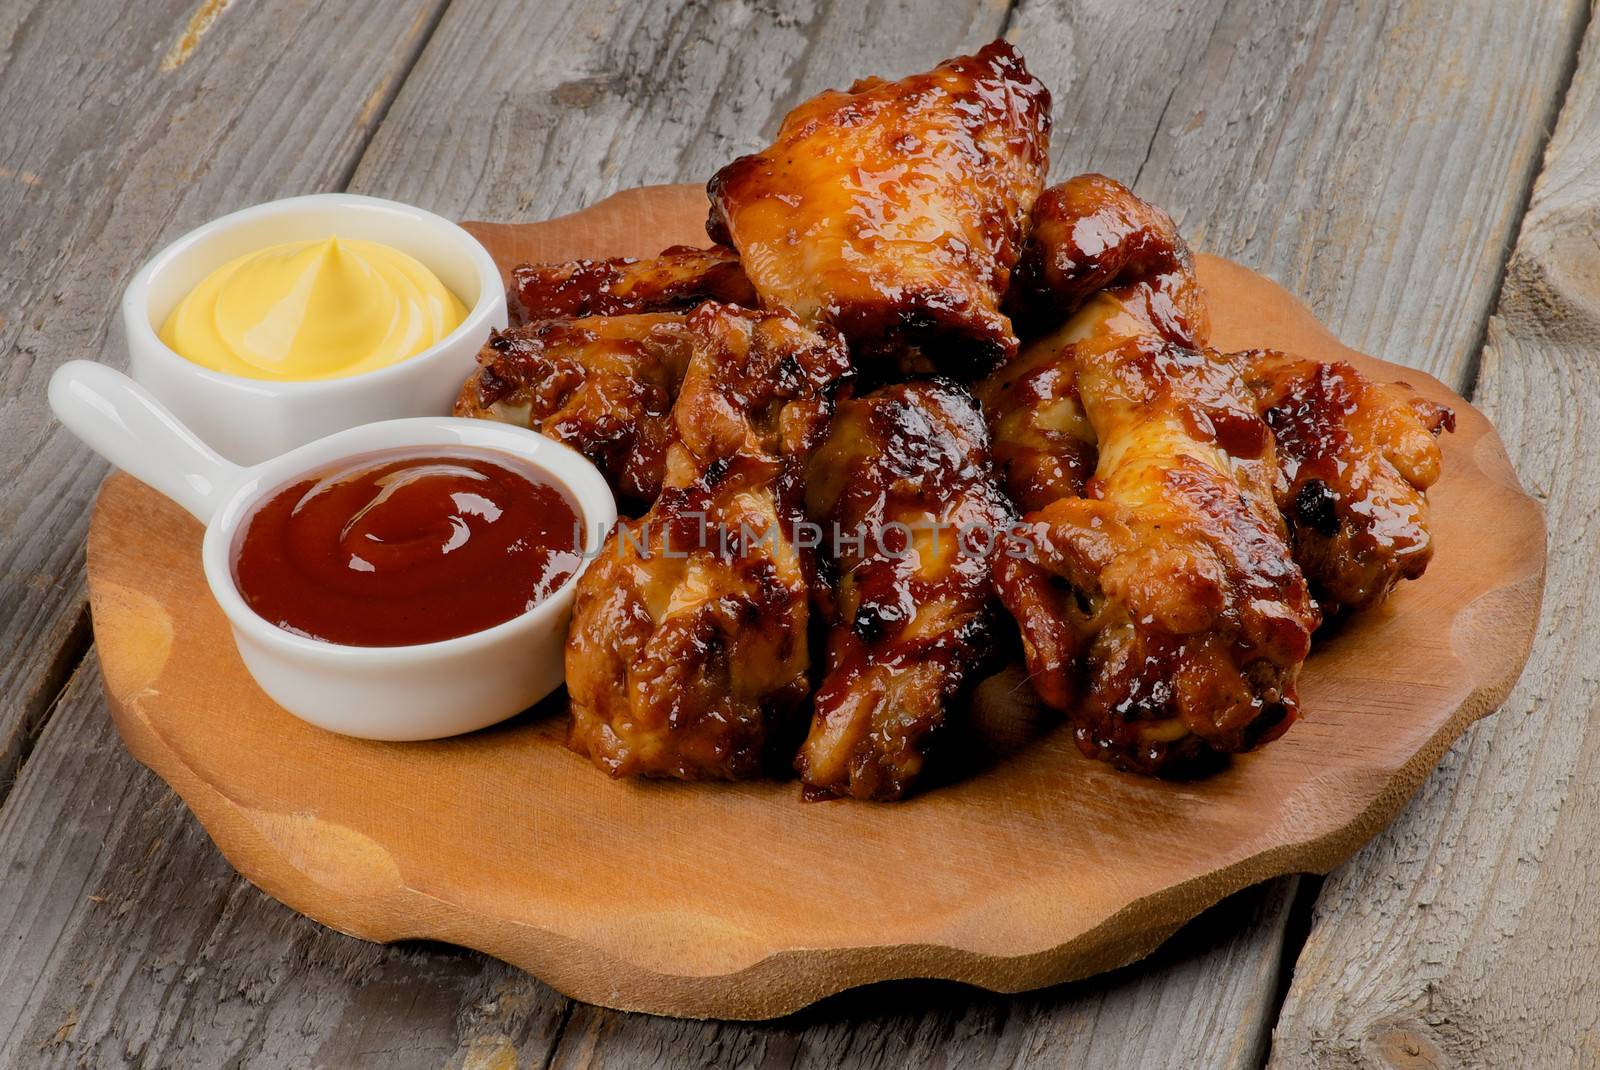 Chicken Legs and Wings Barbecue with Sauces on Wooden Plate closeup on Rustic Wooden background